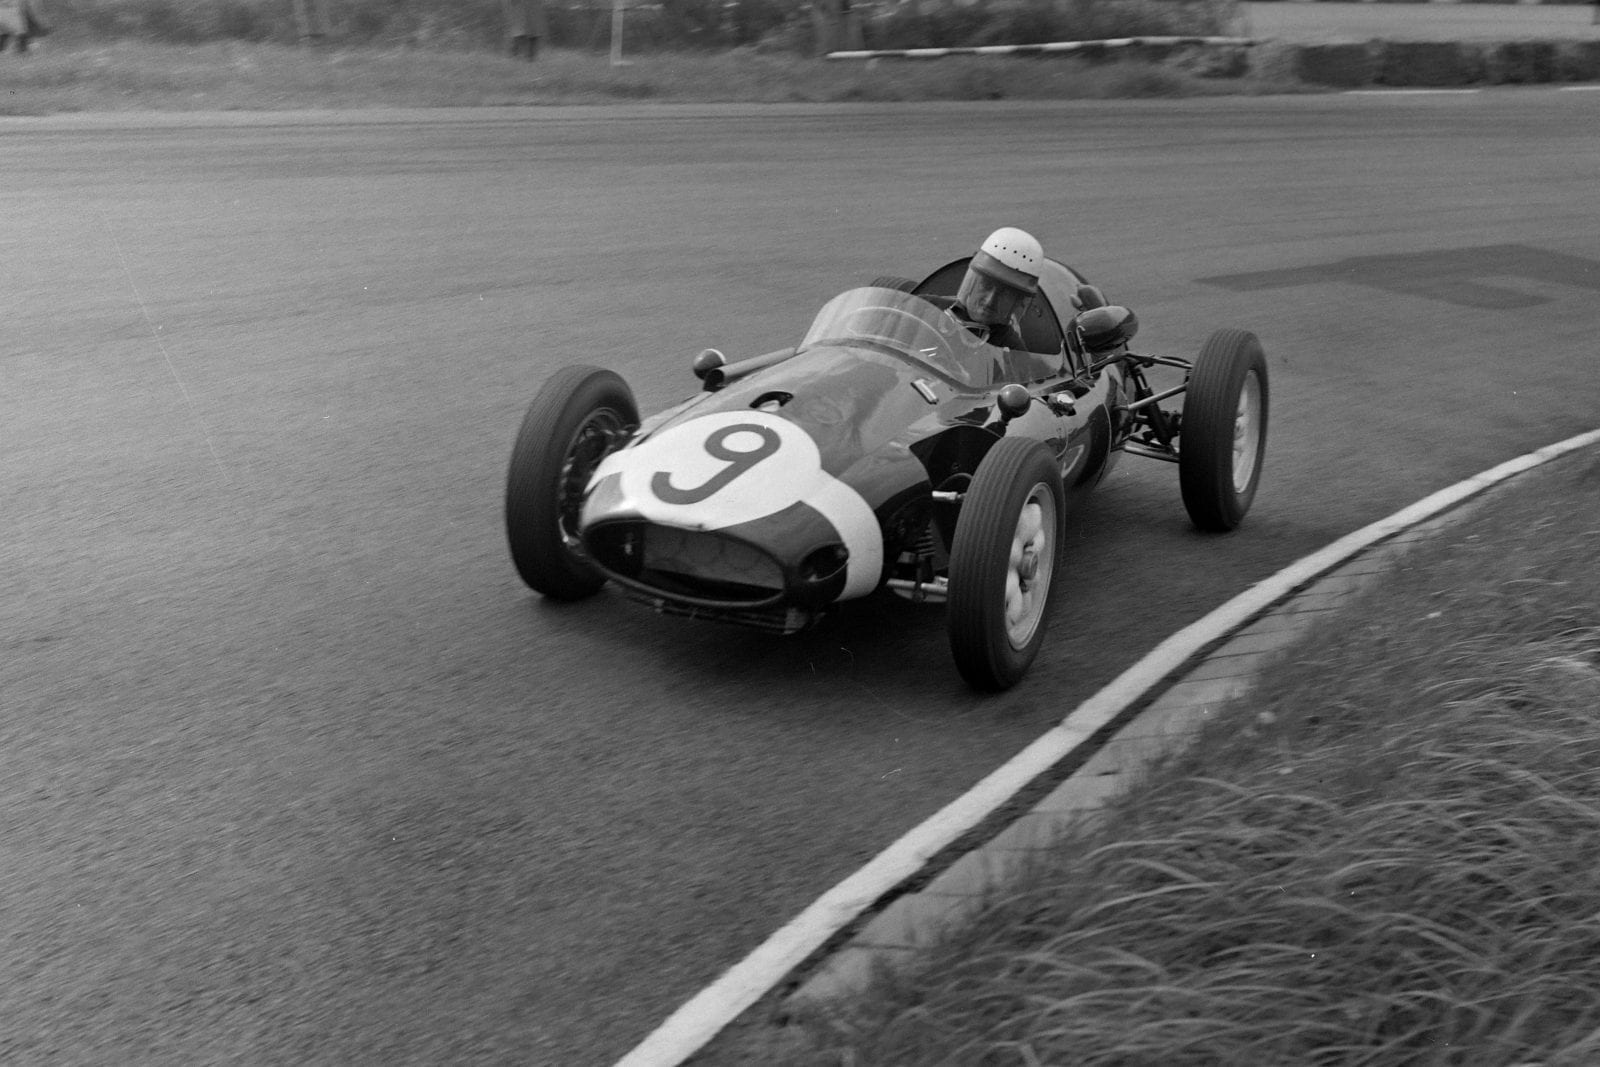 Maurice Trintignant in his Cooper T45 Climax